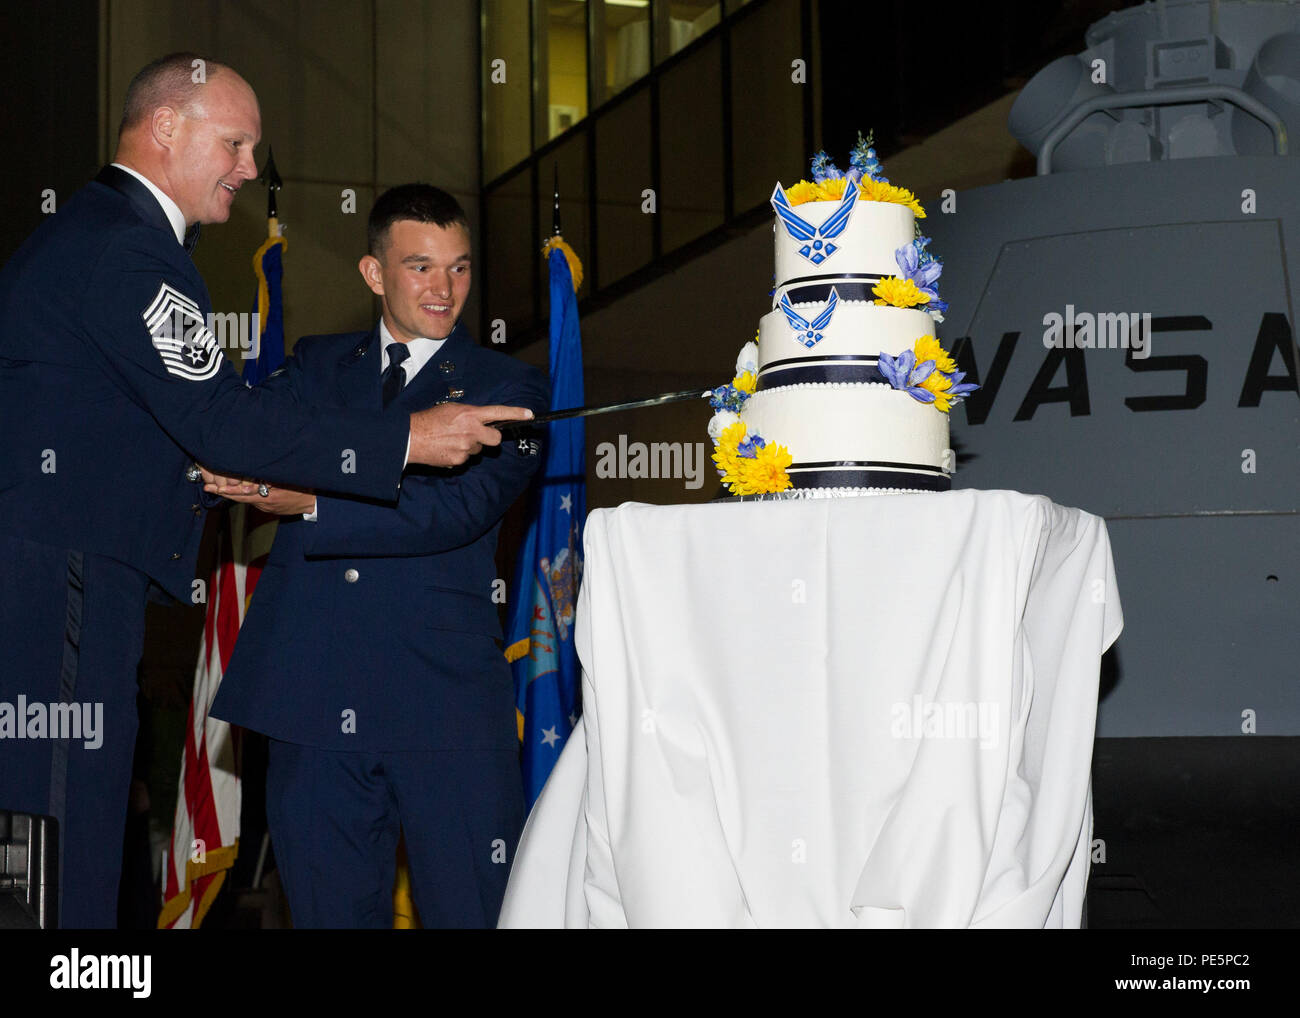 Chief Master Sgt. William Starling, the 49th Maintenance Group superintendent, and Airman 1st Class Benjamin Vetter cut the cake during the 68th Air Force Ball on Sept. 25. This year’s ball was held at the New Mexico Museum of Space History in Alamogordo, N.M., and included a presentation from the fifth chief master sergeant of the Air Force, Robert Gaylor. Stock Photo